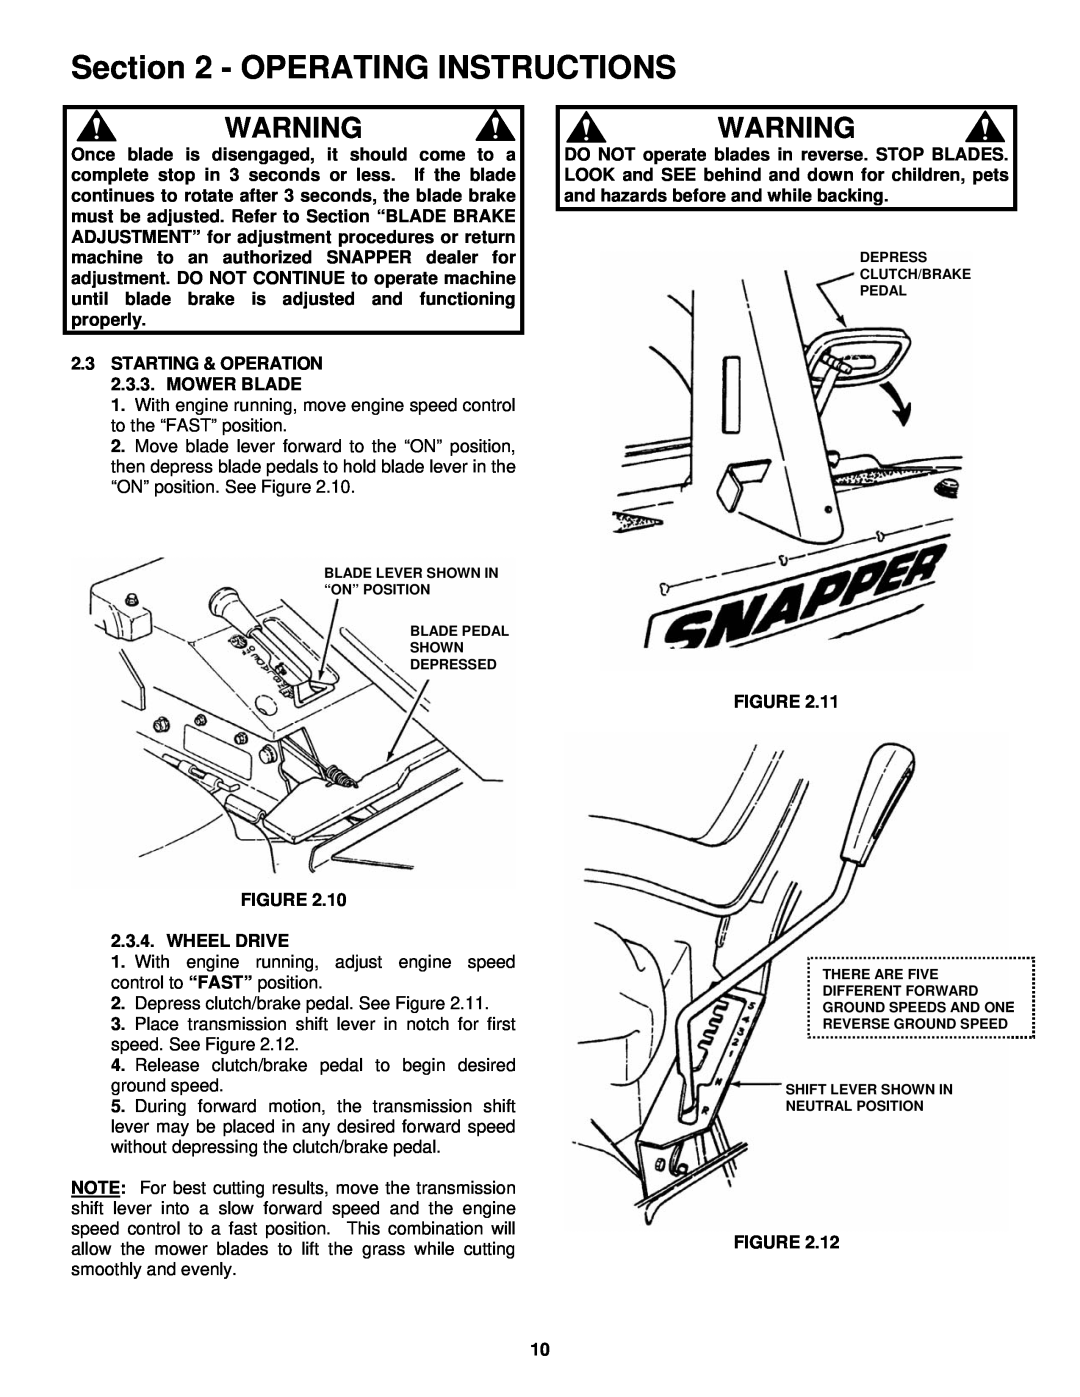 Snapper important safety instructions Operating Instructions, STARTING & OPERATION 2.3.3. MOWER BLADE 